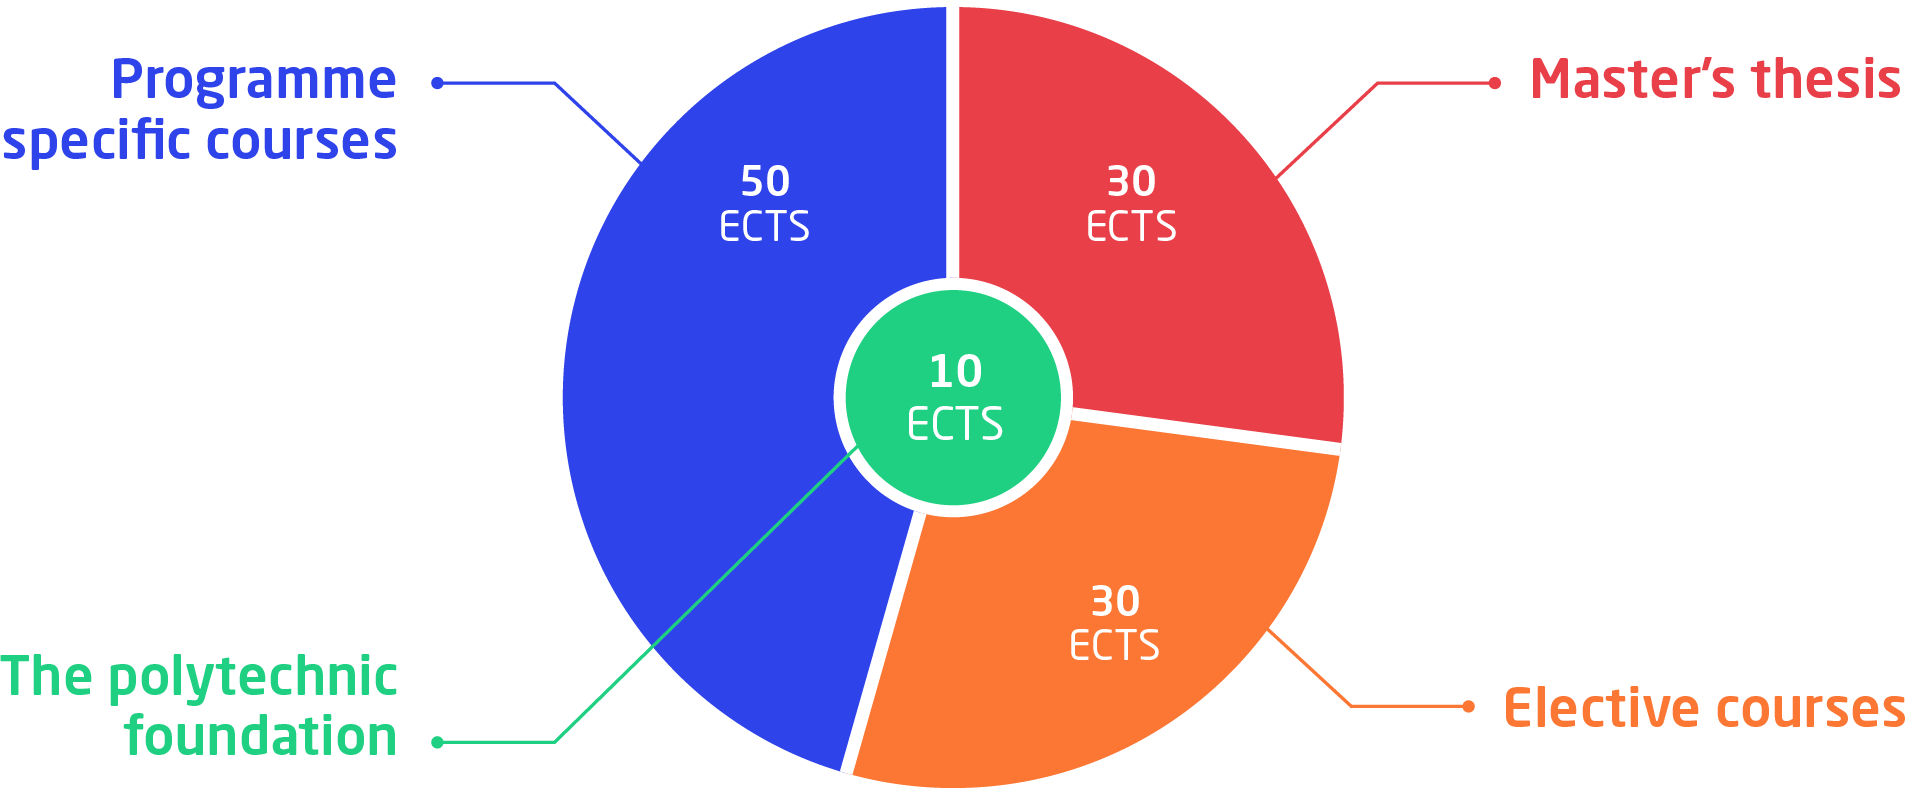 Structure of the MSc programme. The polytechnic foundation: 10 ECTS. Programme specific courses: 50 ECTS. Elective courses: 30 ECTS. Master's thesis: 30 ECTS.